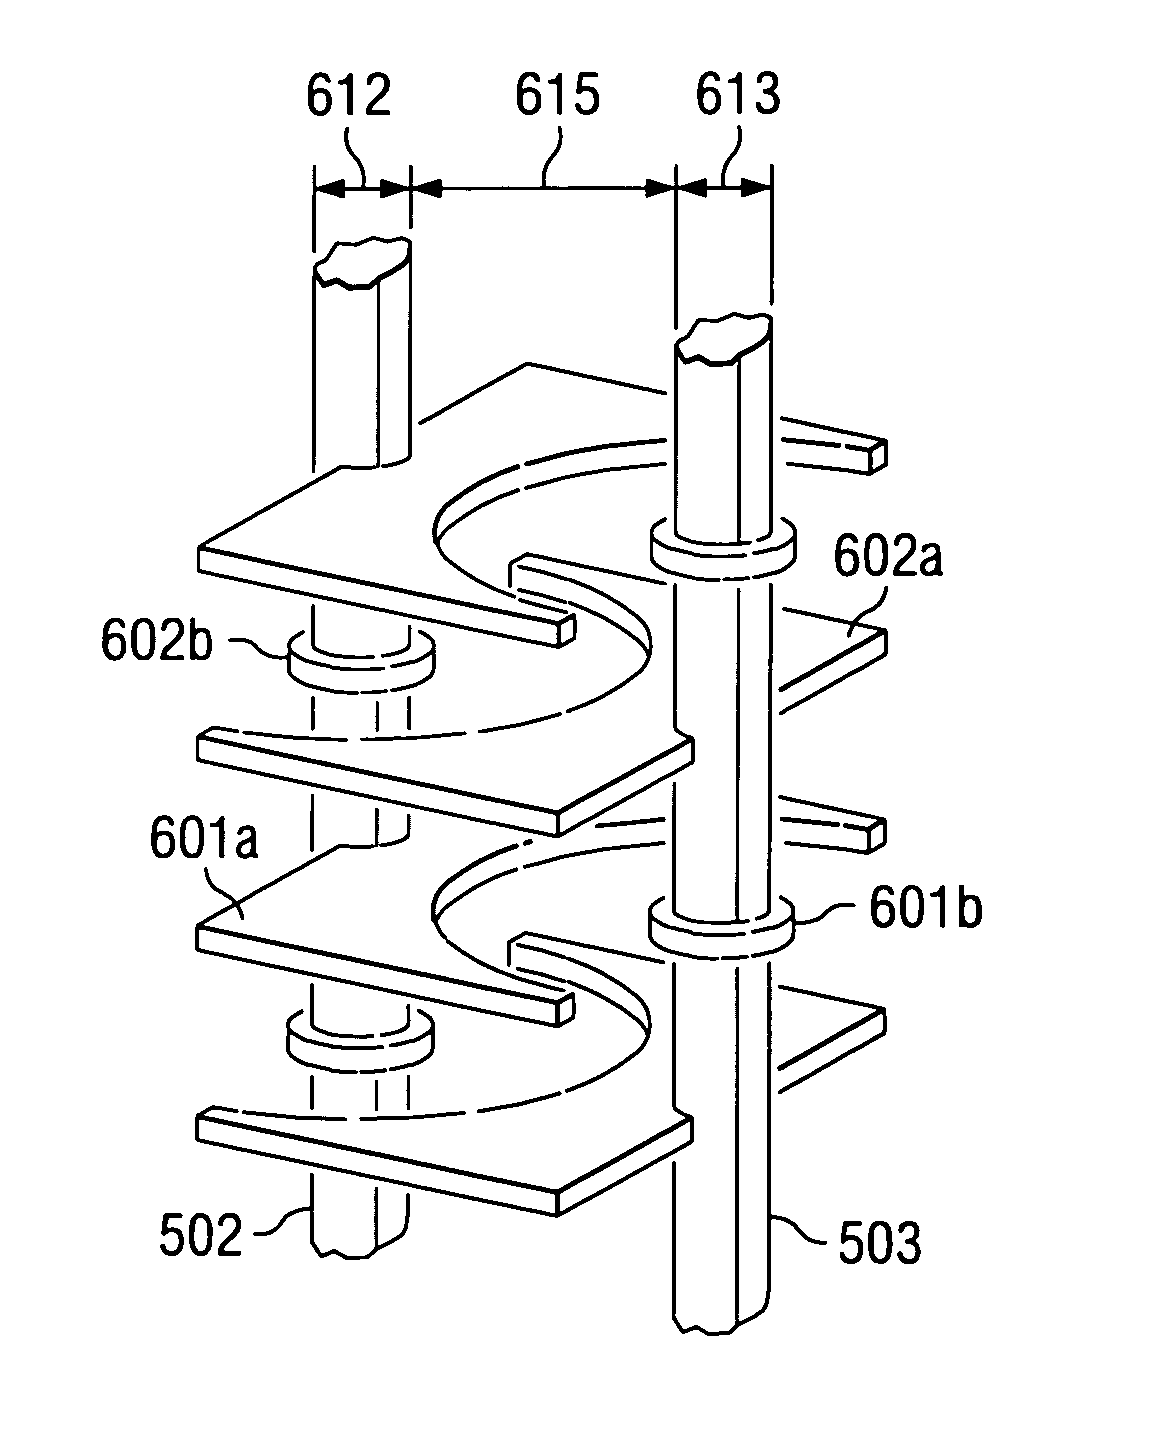 Via structure of packages for high frequency semiconductor devices